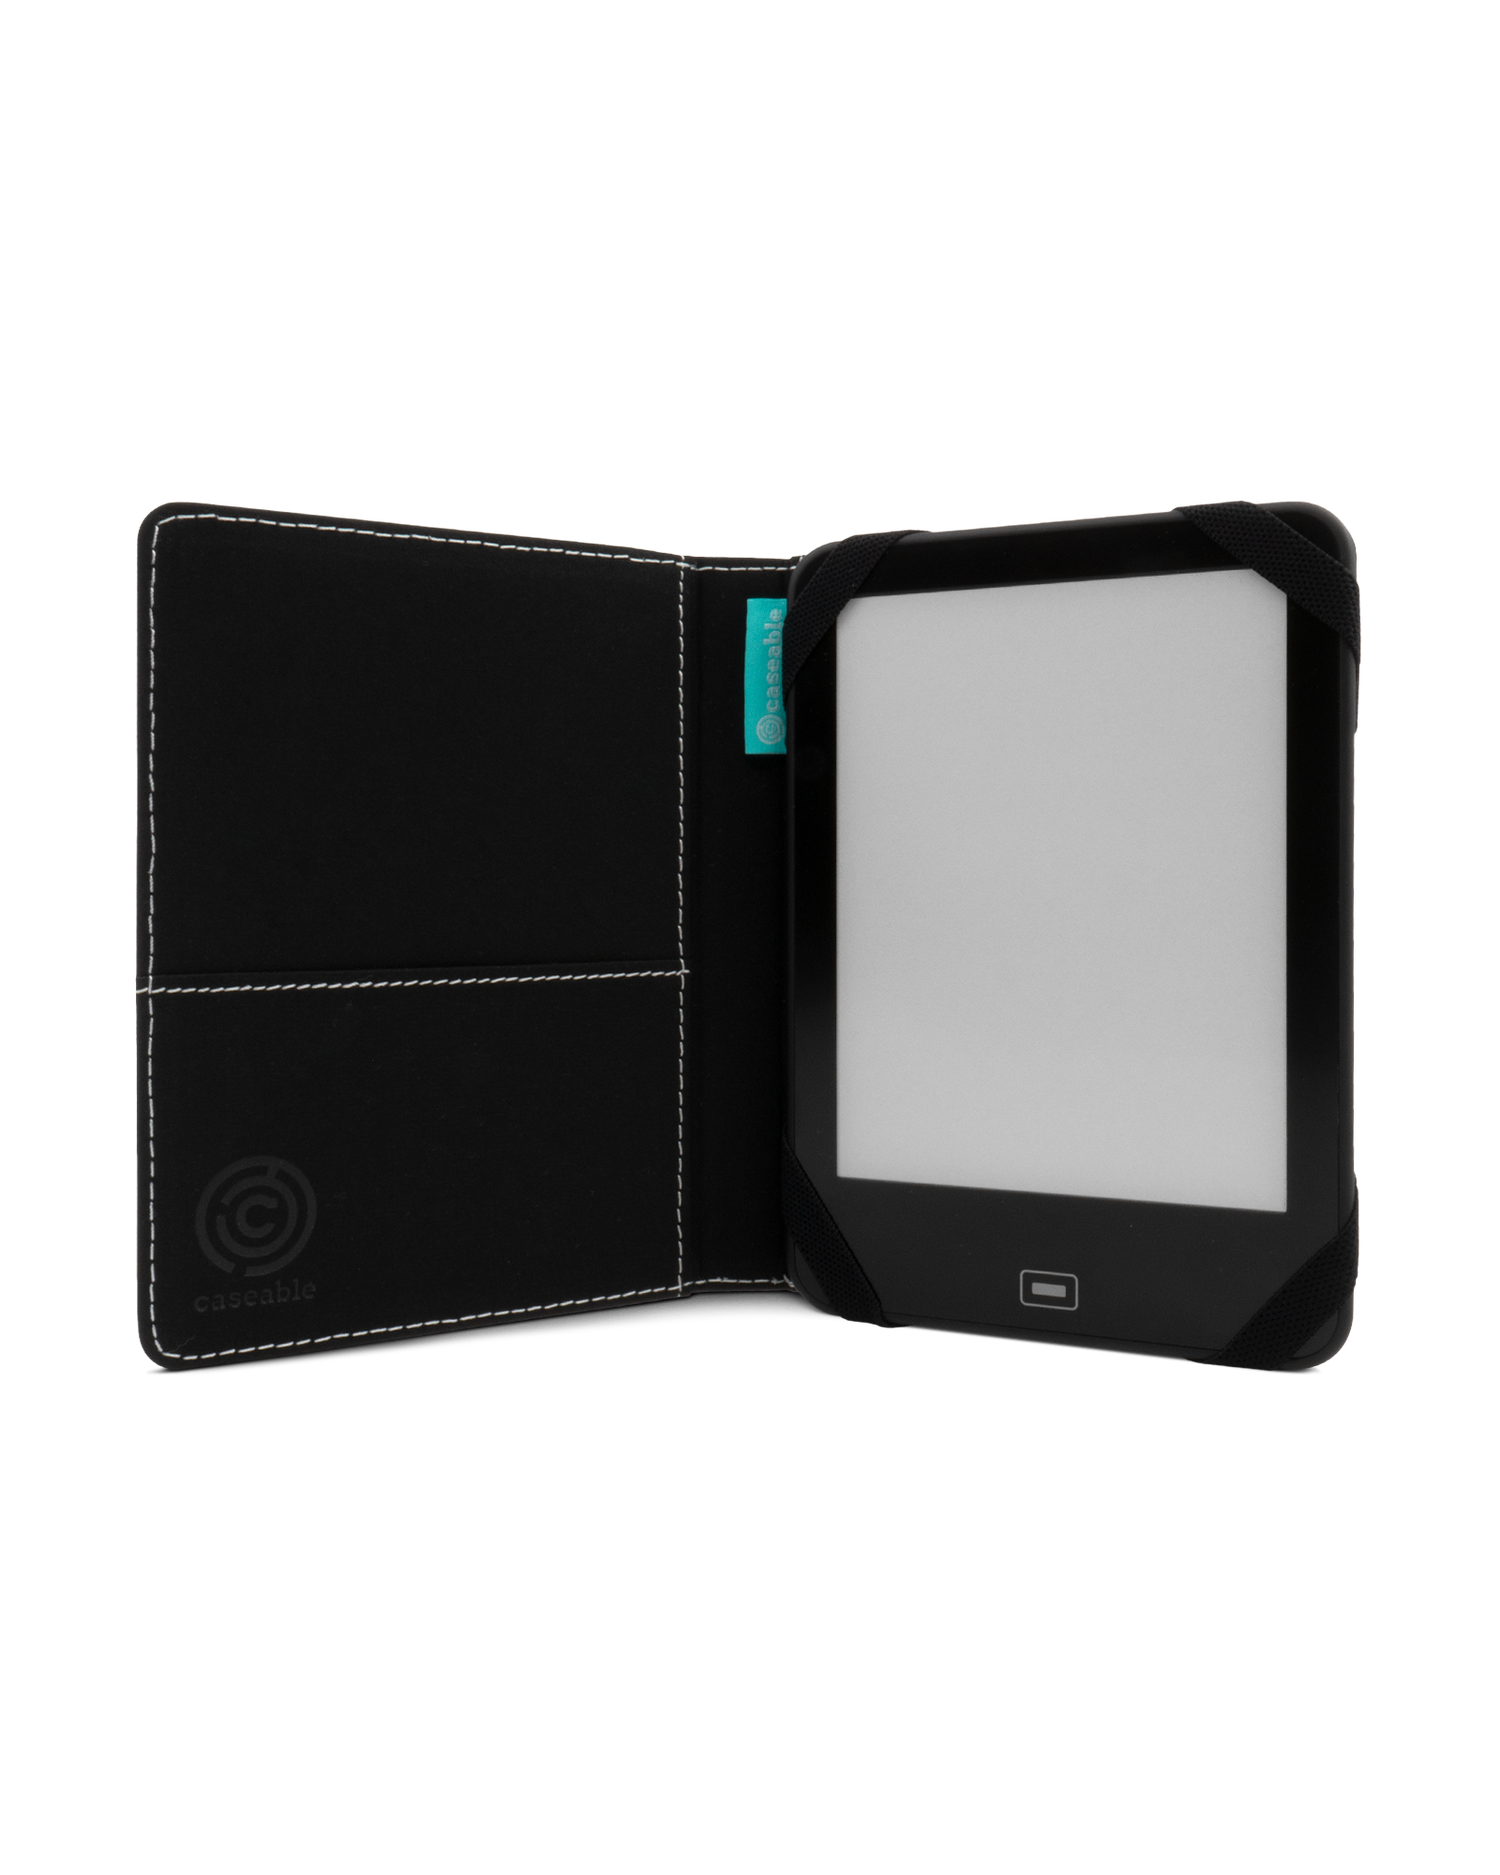 TURQUOISE eReader Case XS: Opened interior view